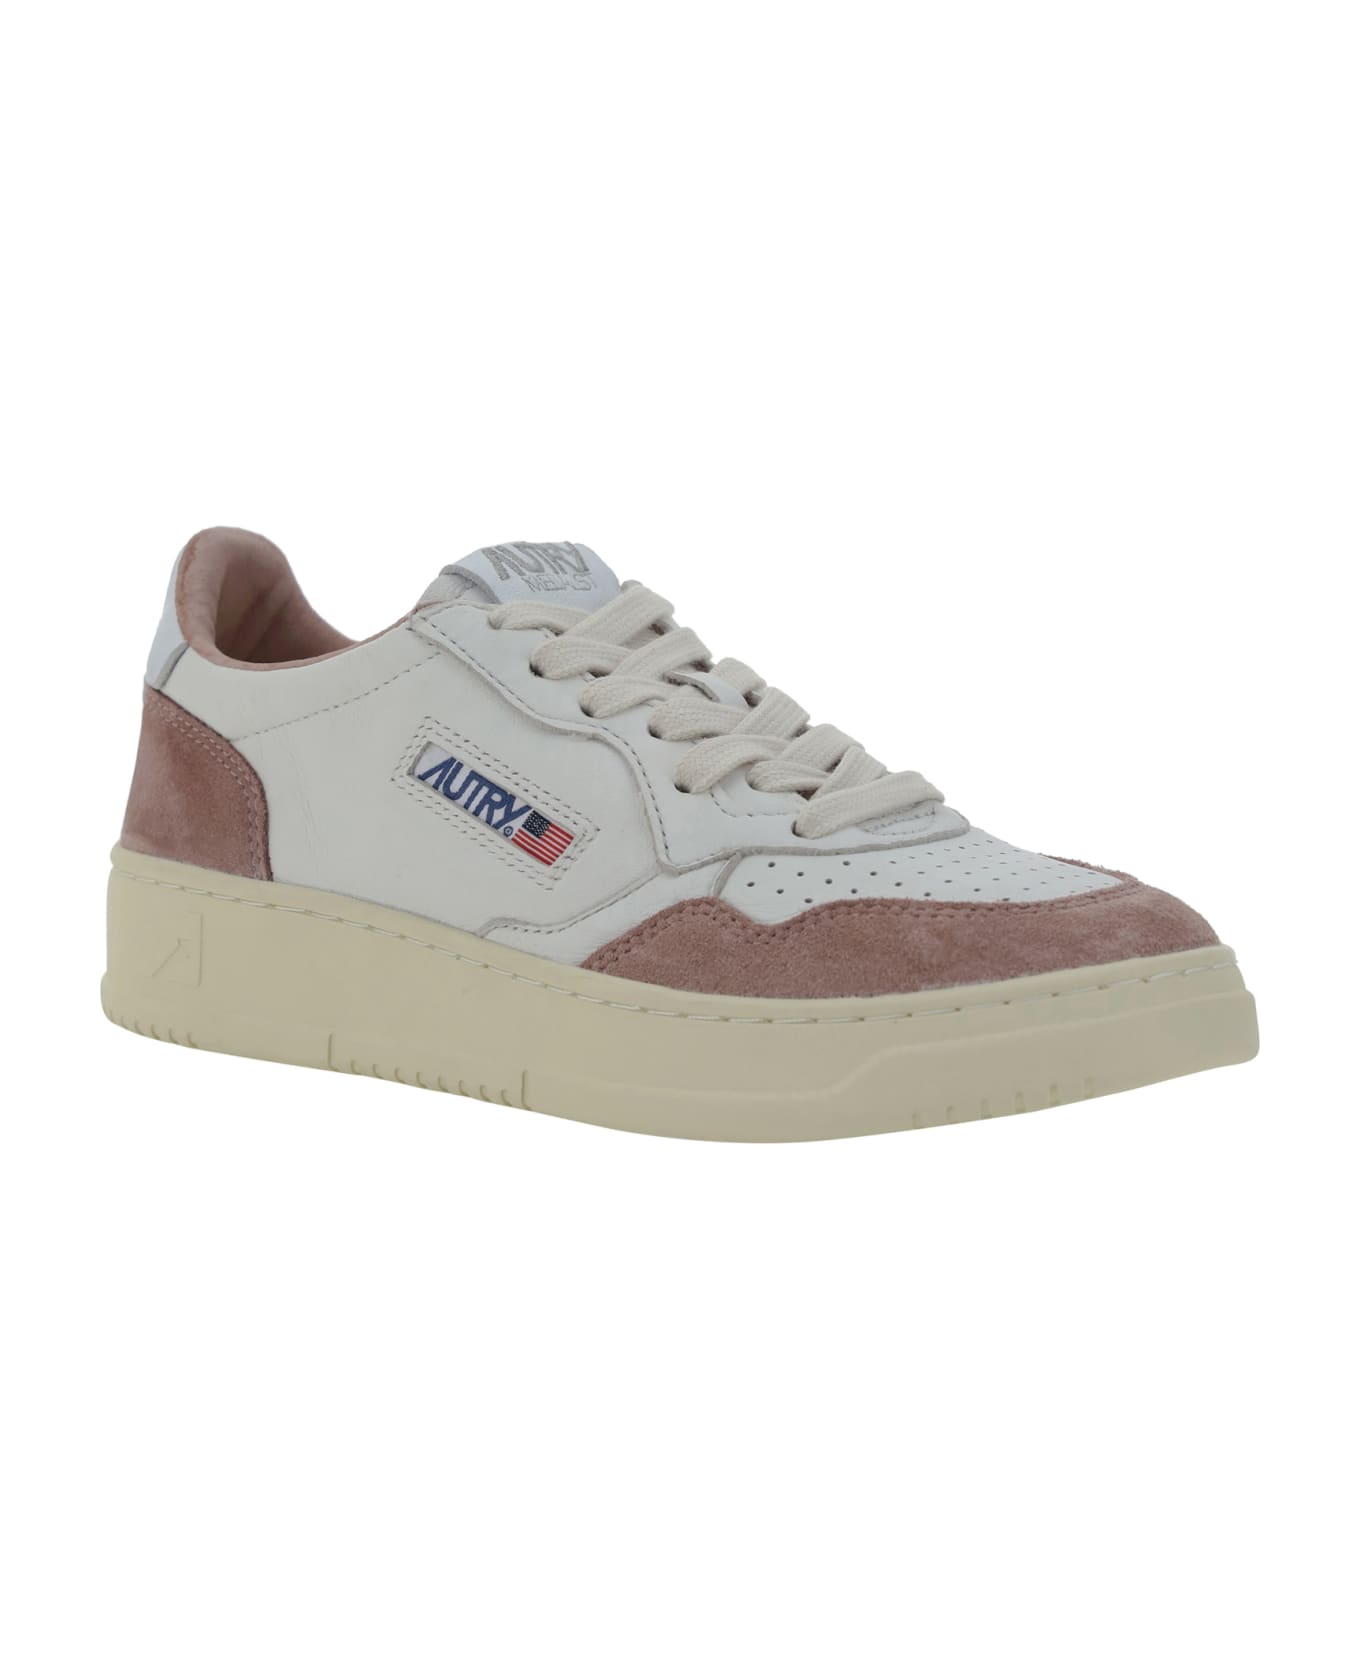 Autry Medalist Low Sneakers - Wht/nude スニーカー